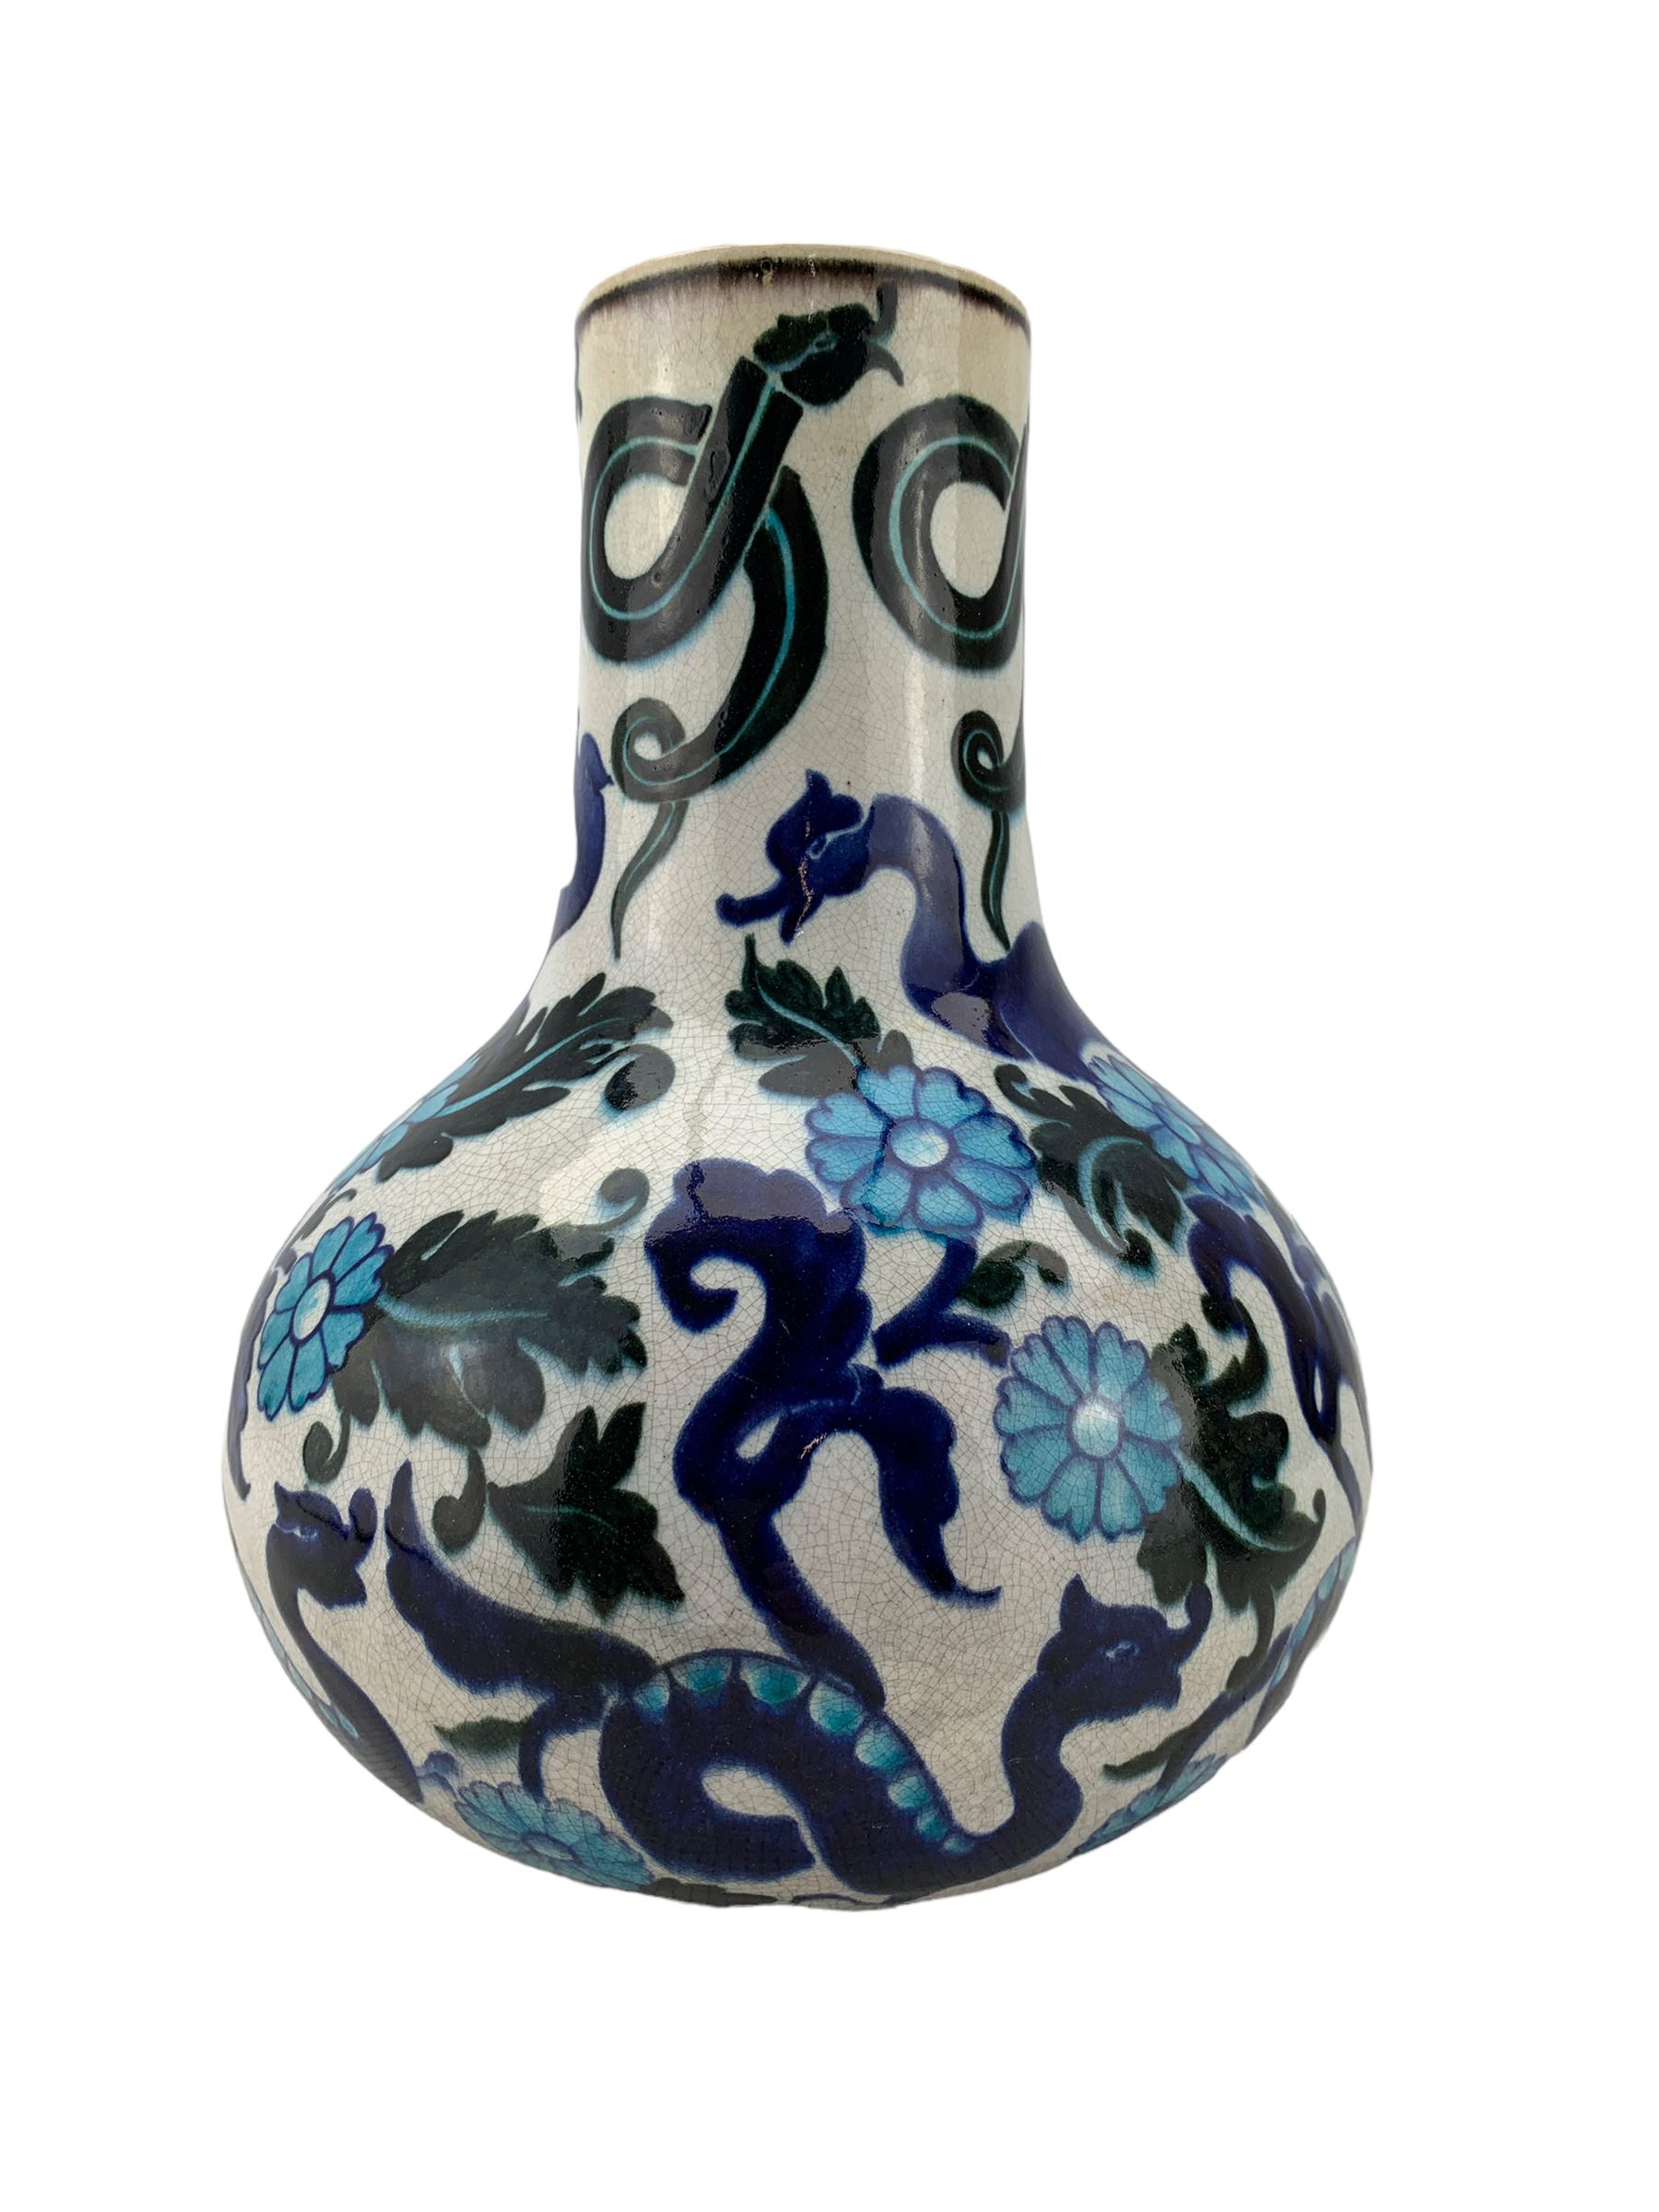 Burmantofts Faience Anglo-Persian bottle vase - Image 2 of 6